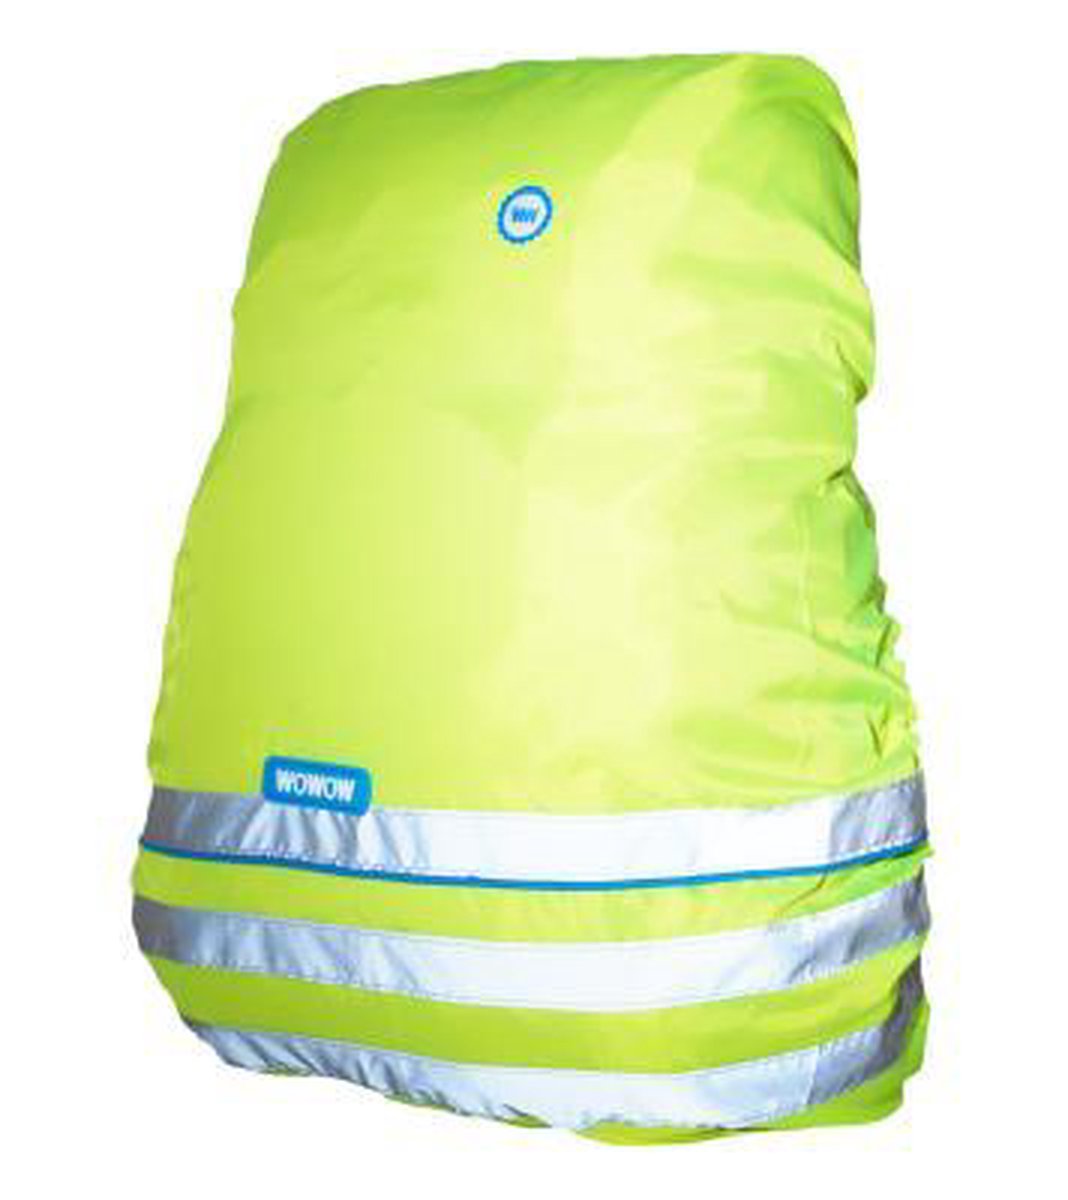 Wowow Regenhoes - Bag Cover Fun - rugzakhoes fluo geel